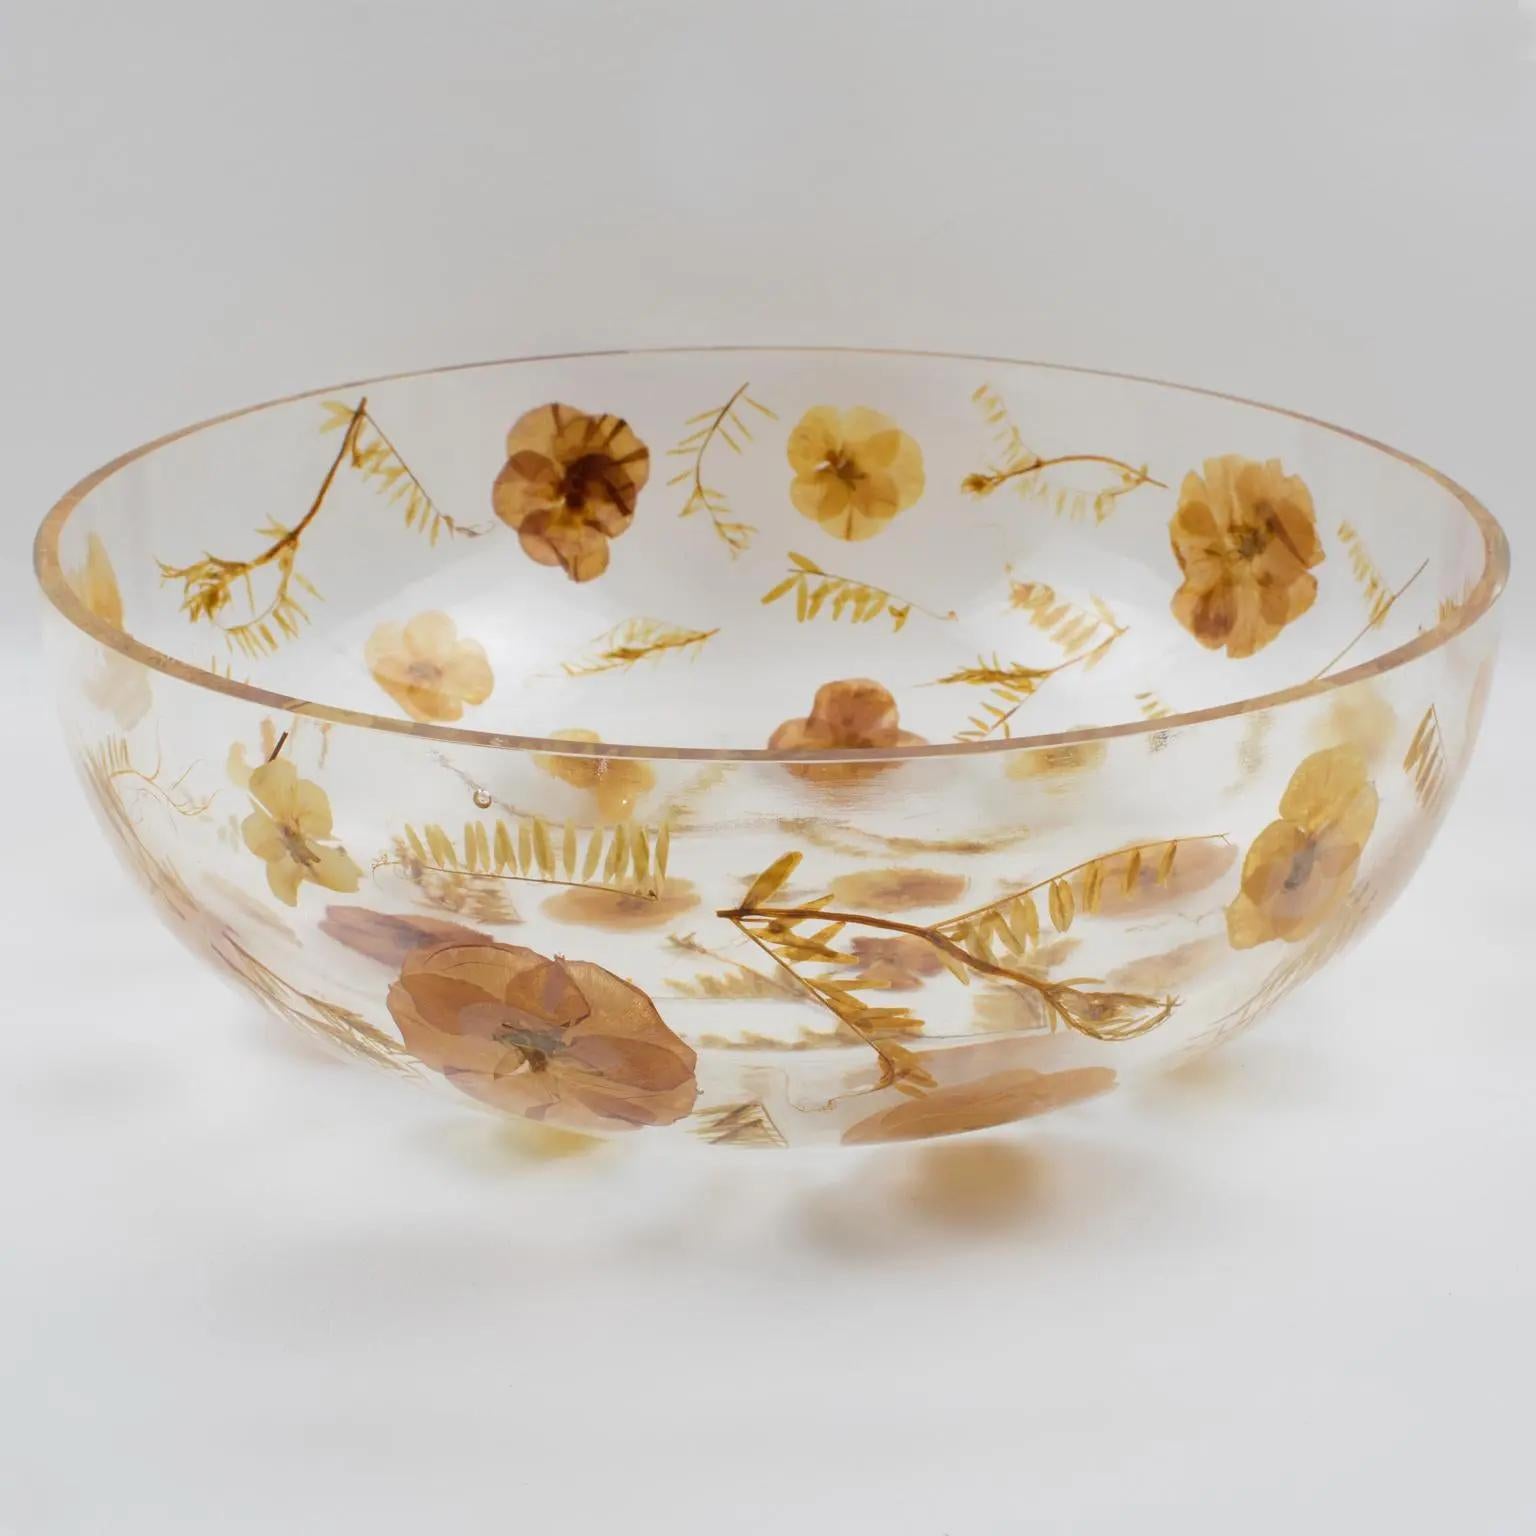 Resin Bowl Centerpiece with Leaves and Flowers Inclusions, Italy 1970s In Excellent Condition For Sale In Atlanta, GA